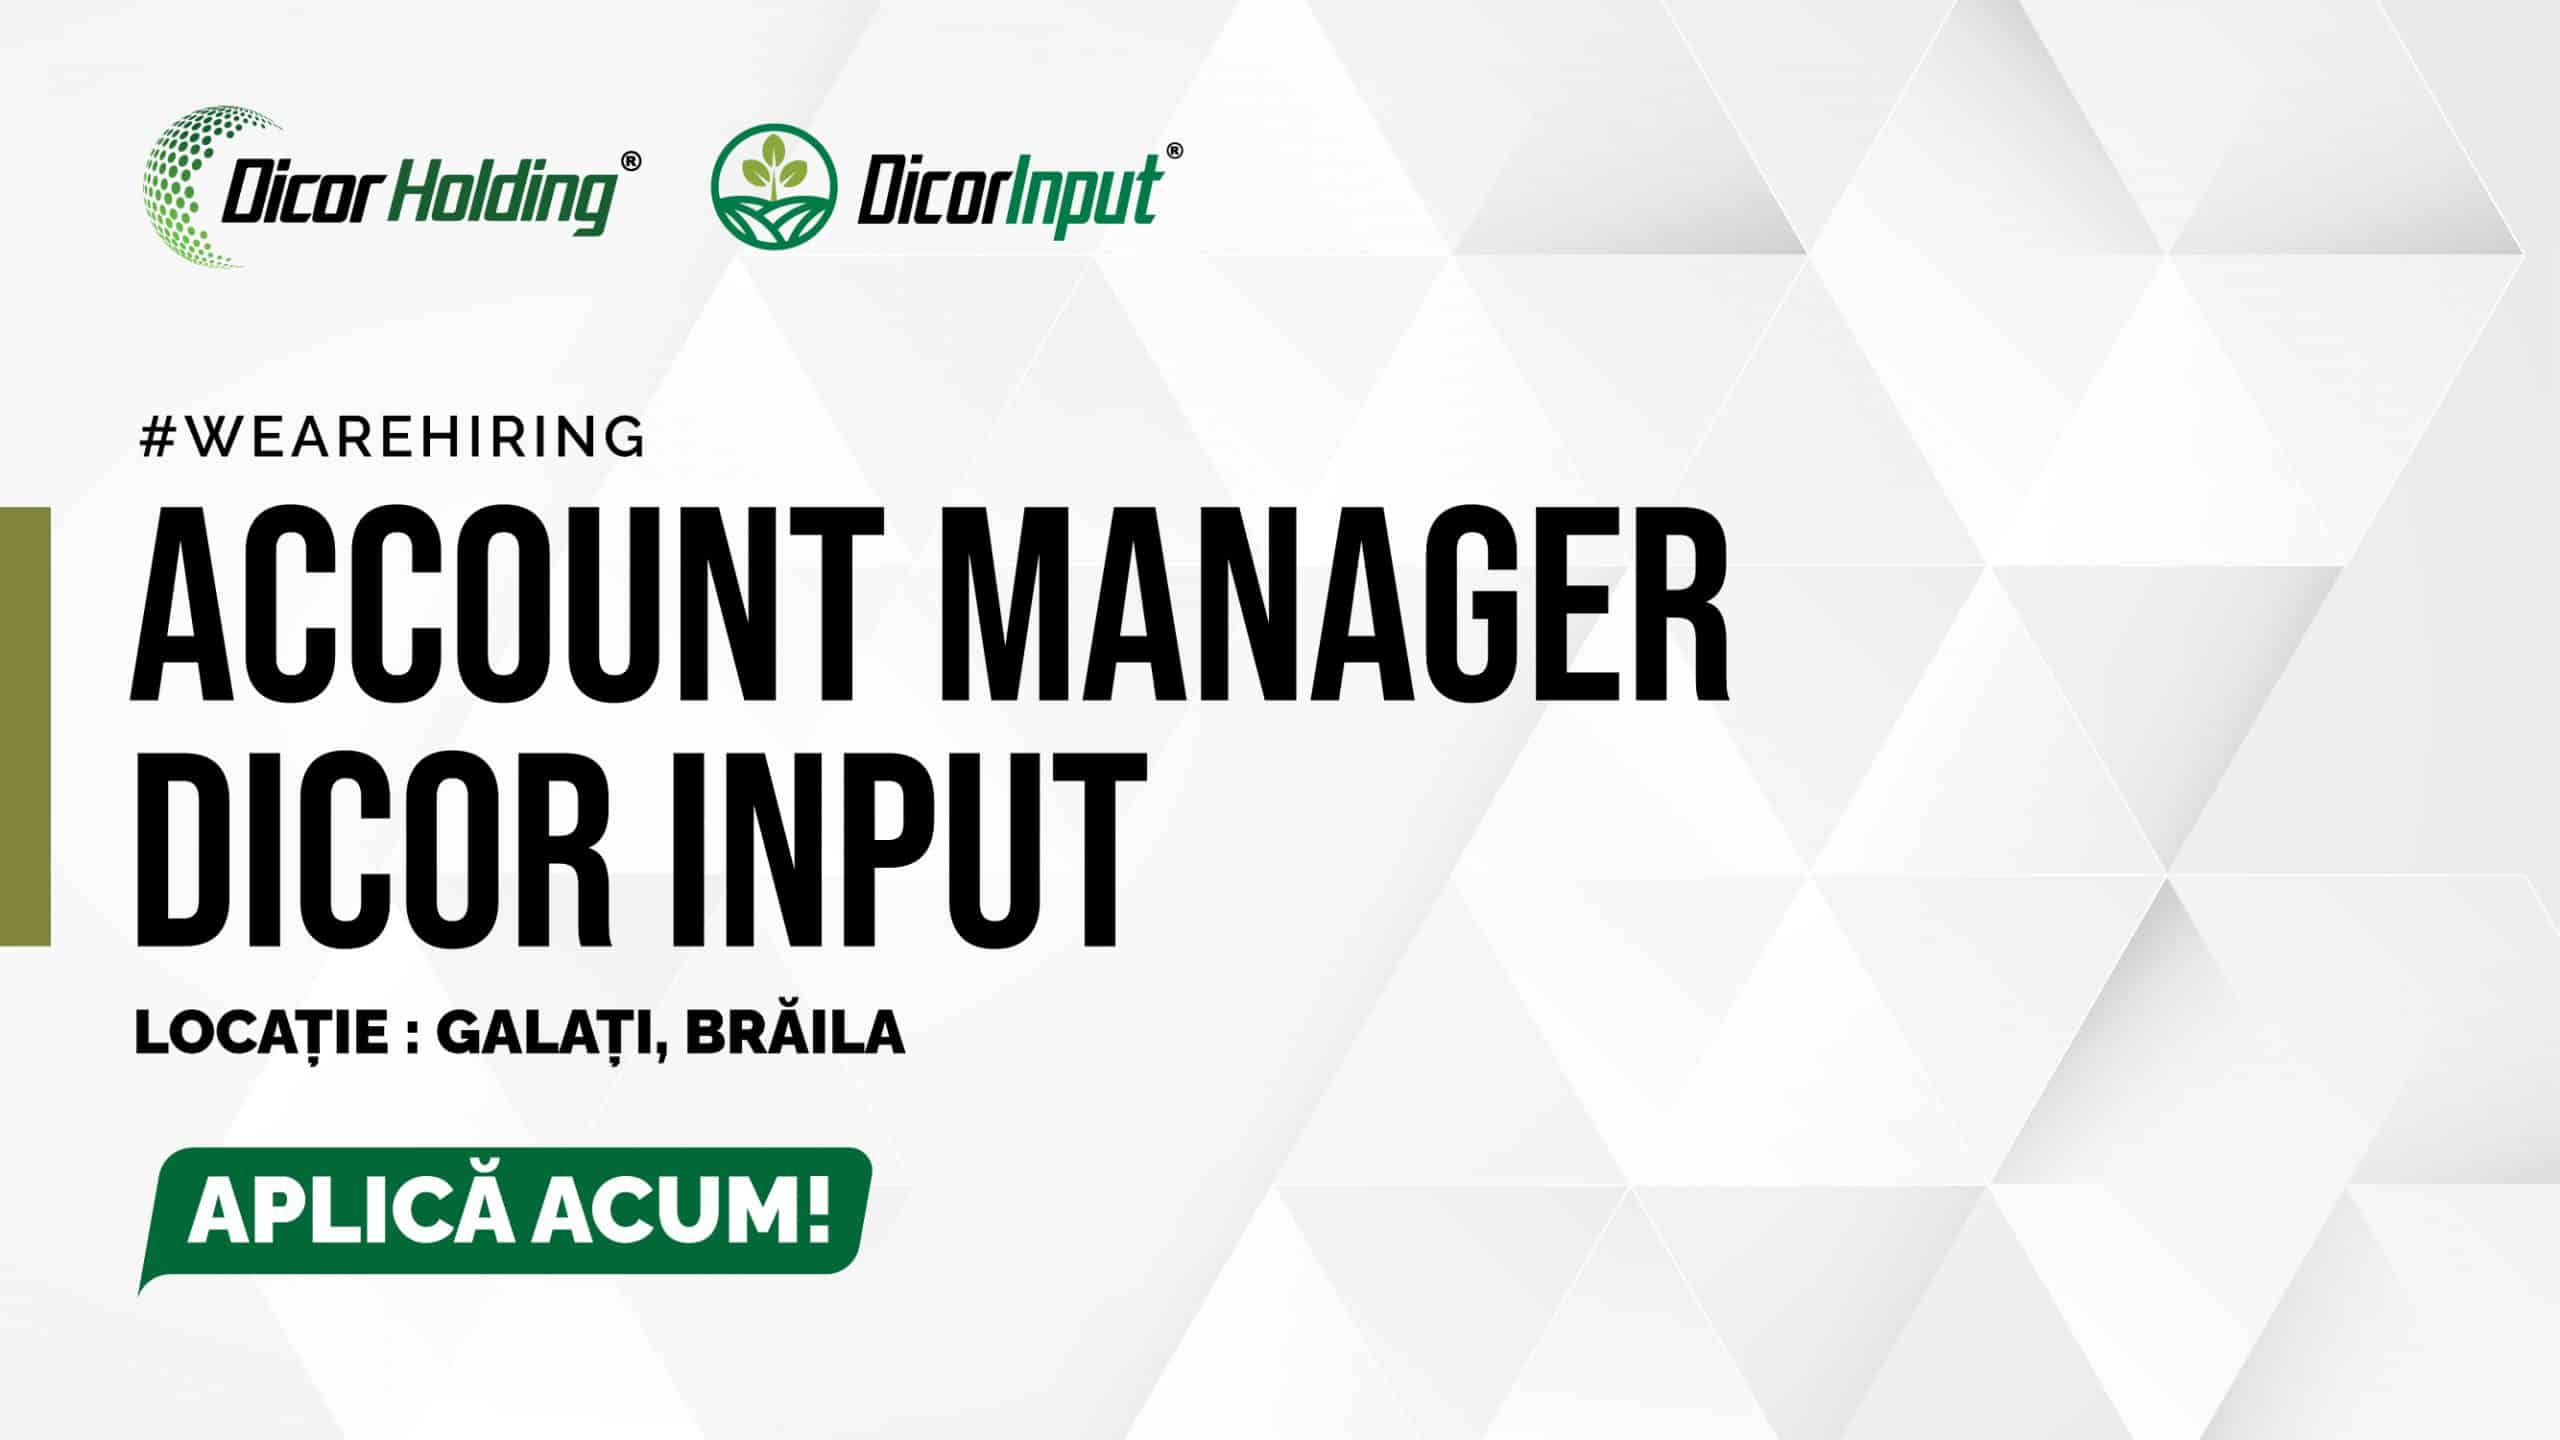 Account Manager Dicor Input